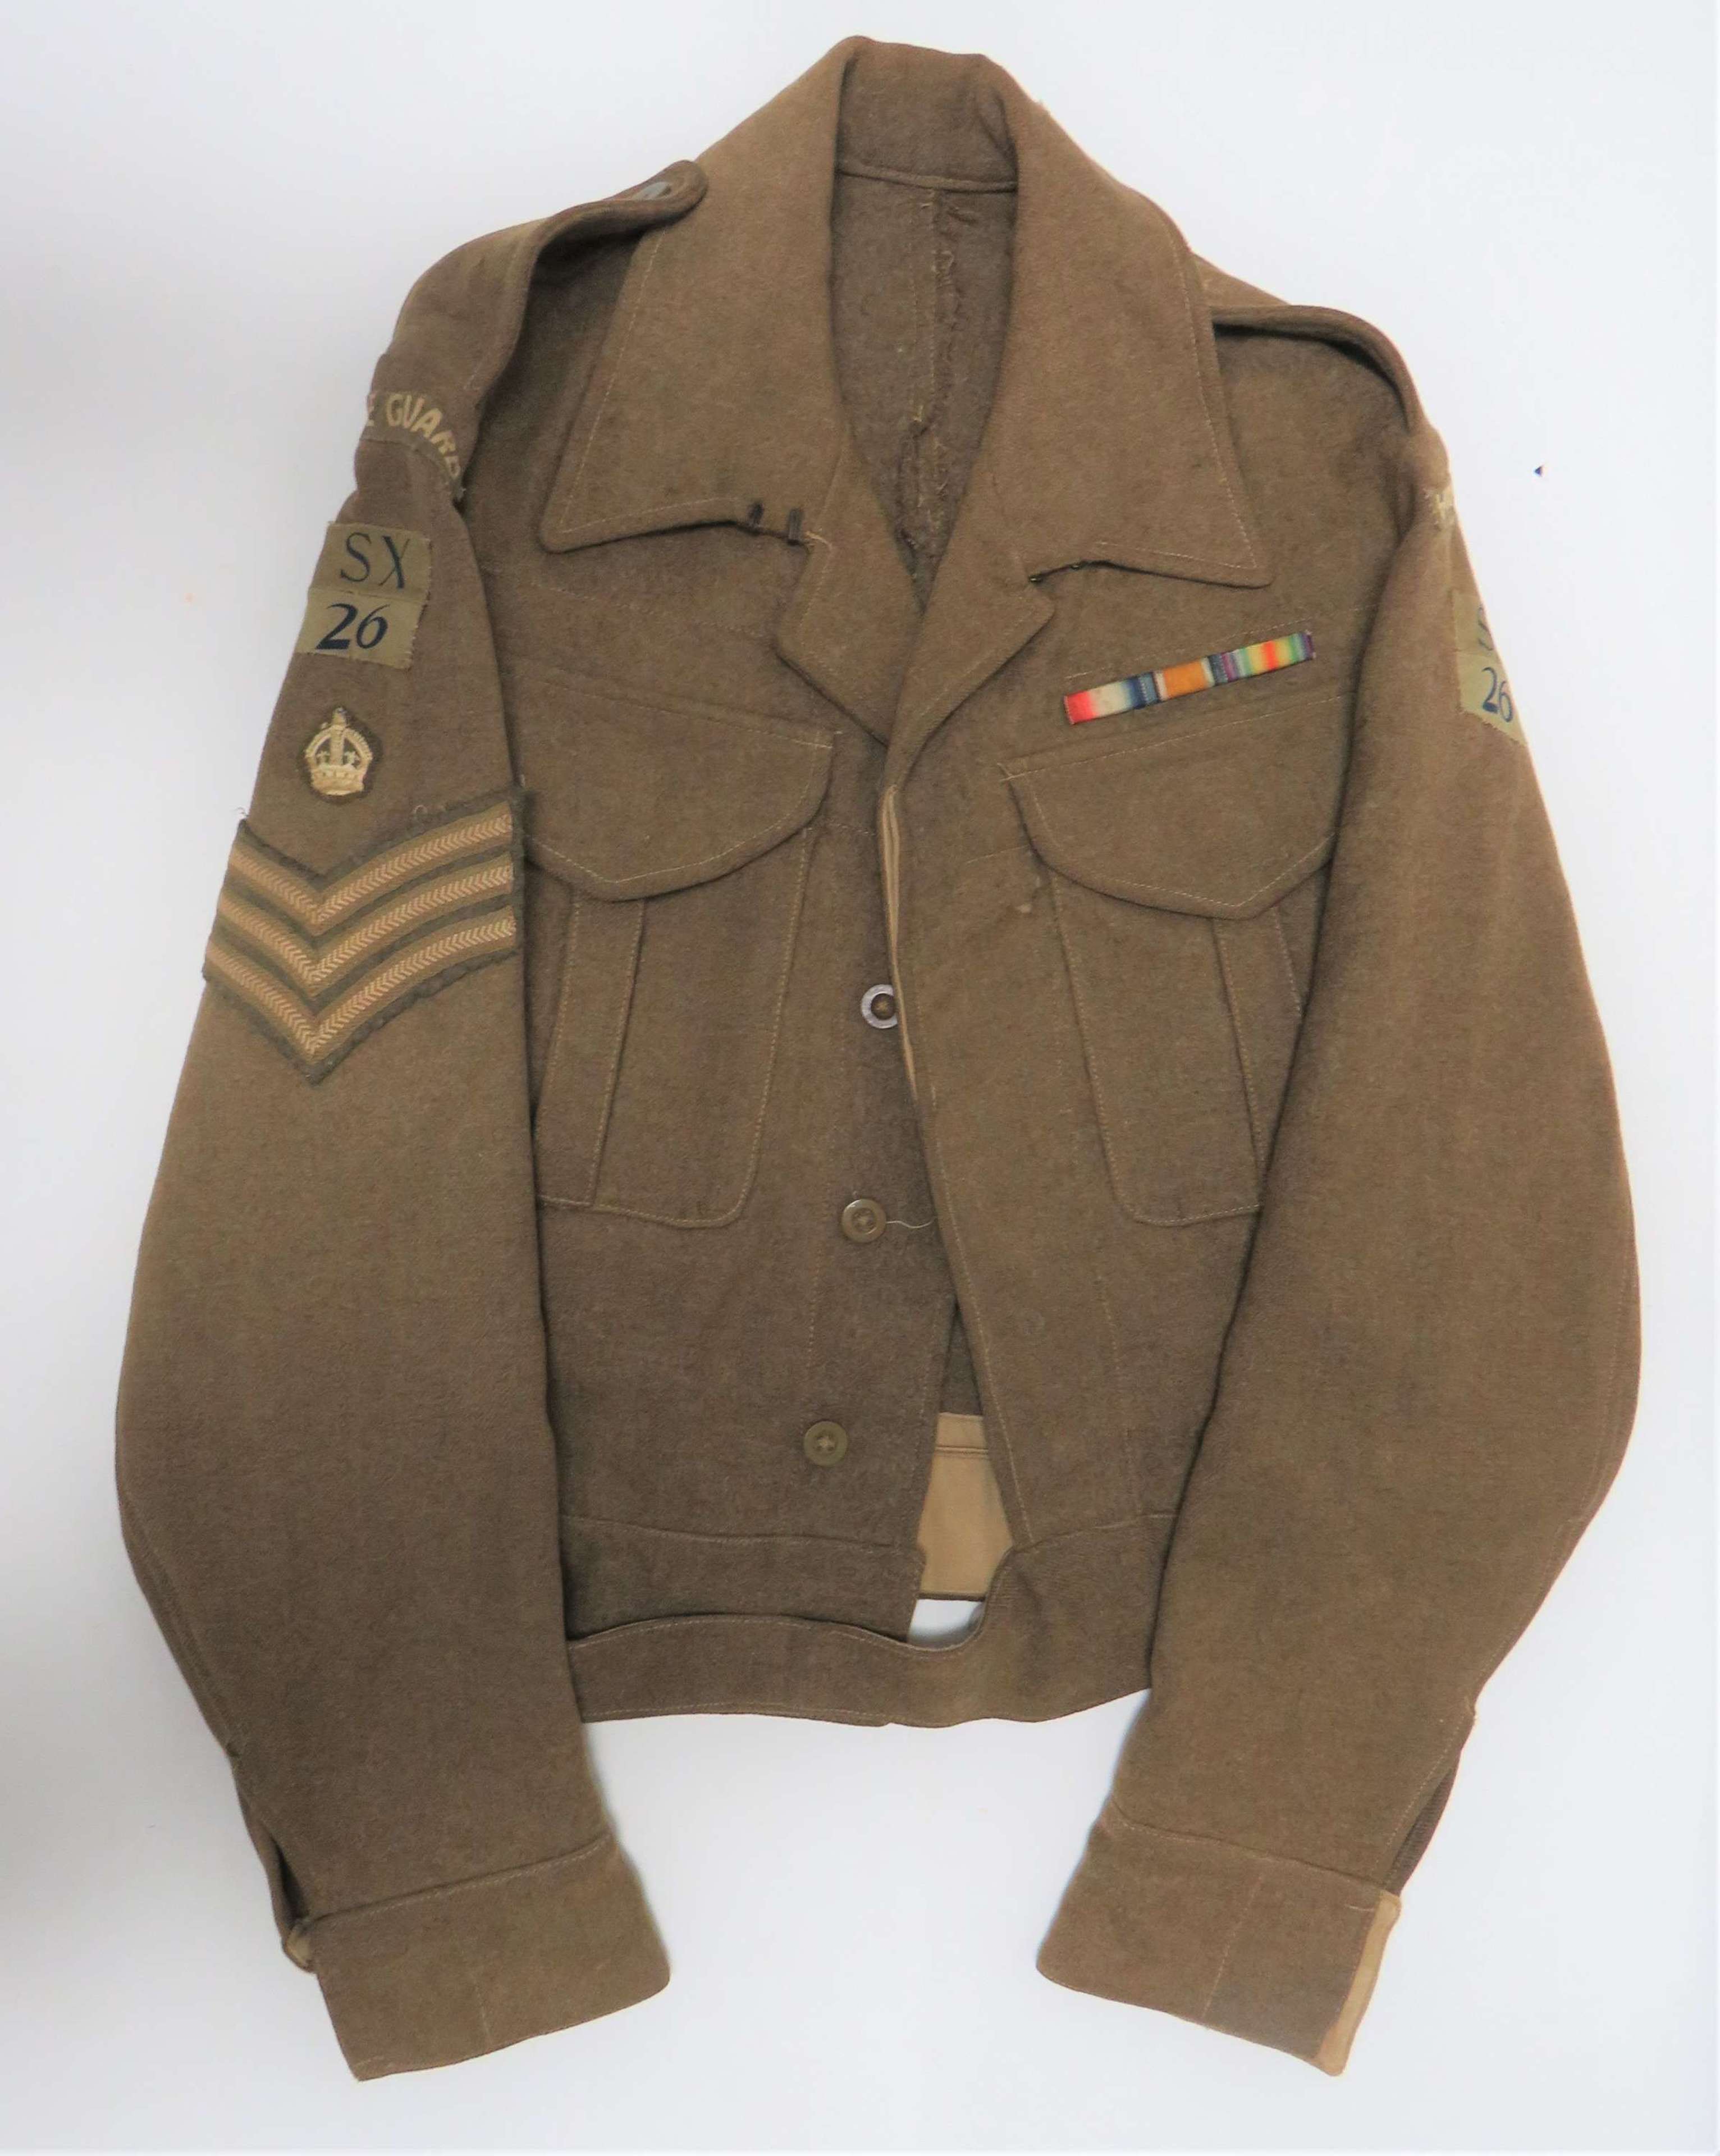 Rare 1937 Pattern 1st Type Battledress Jacket reissued to Home Guard